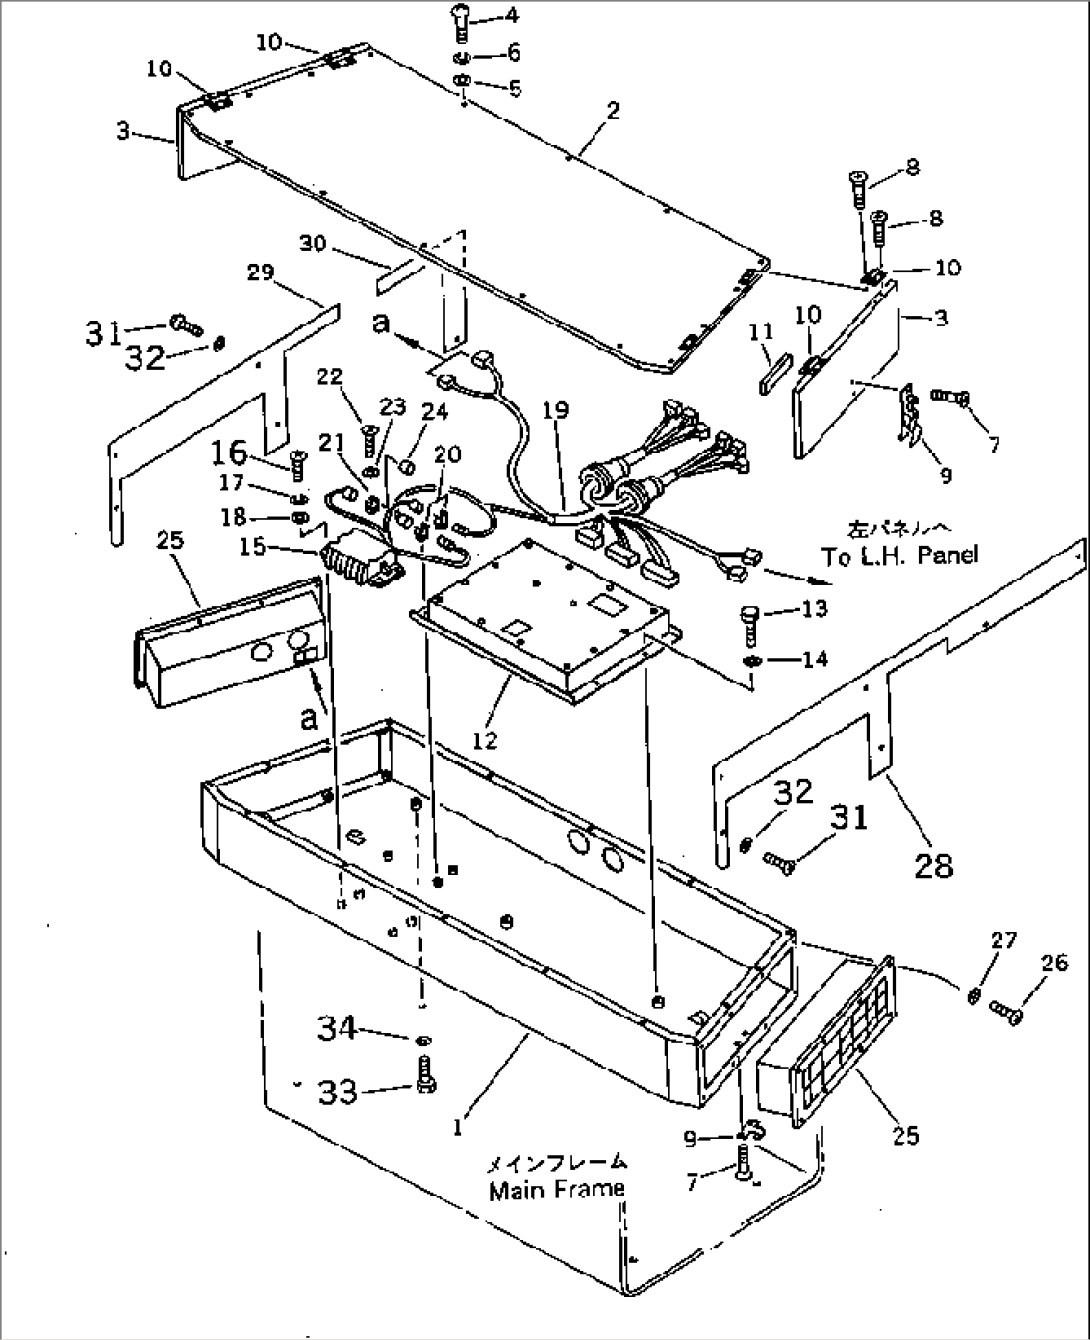 AUTOMATIC CUTTER CONTROL (1/2) (RELATED PARTS)